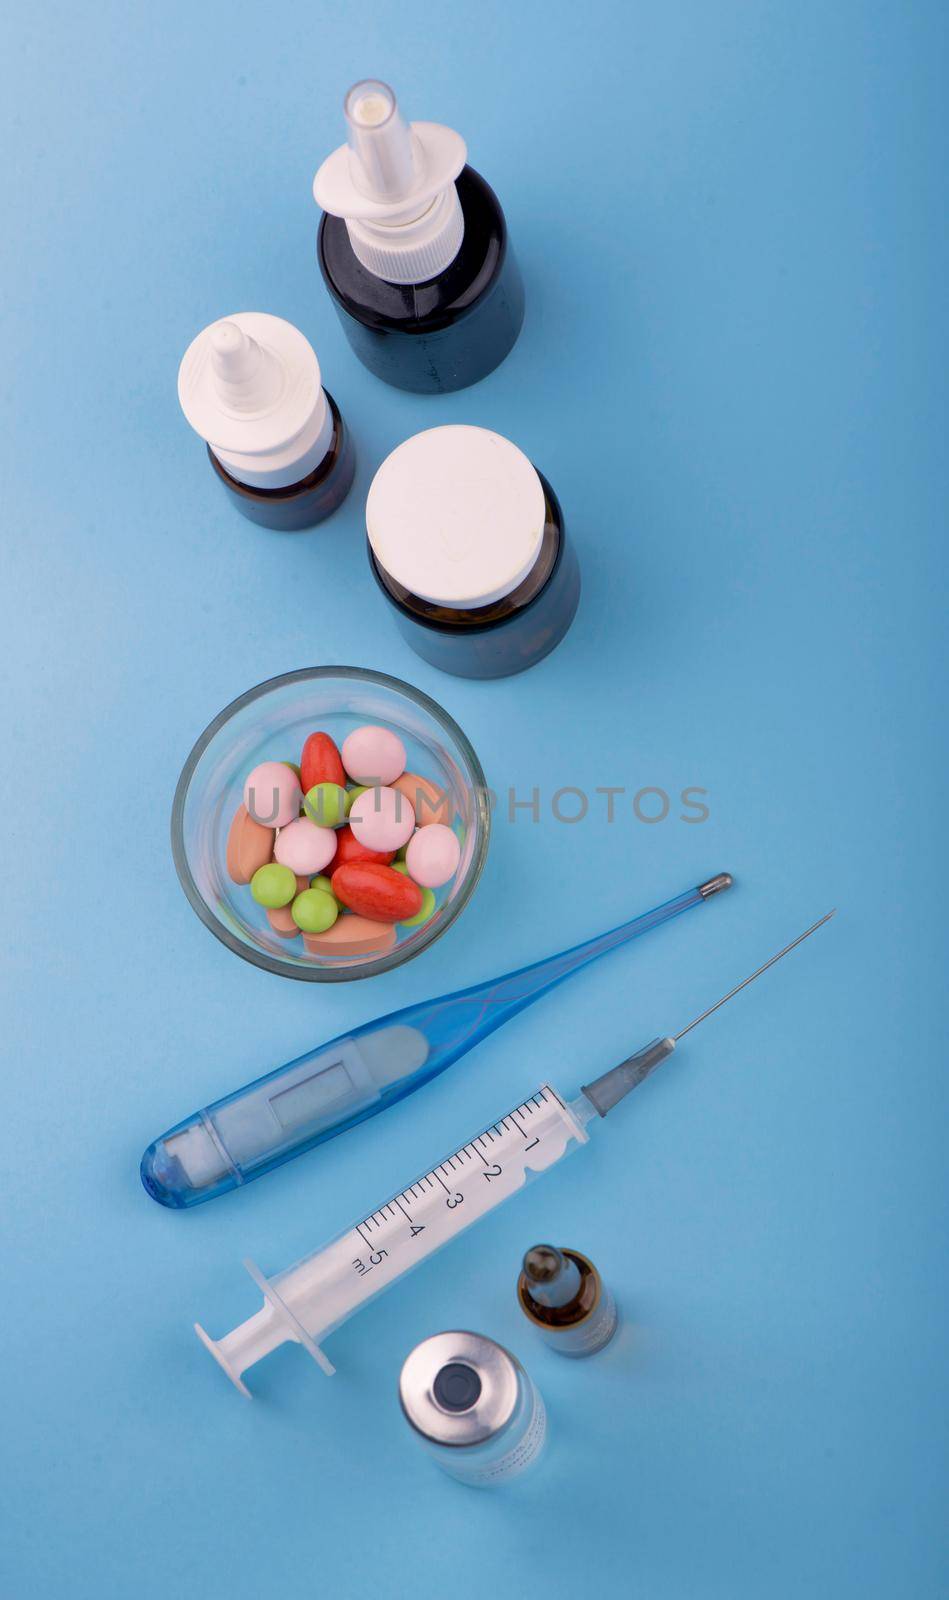 syringe and pills are on the table, medical supplies are on the table.